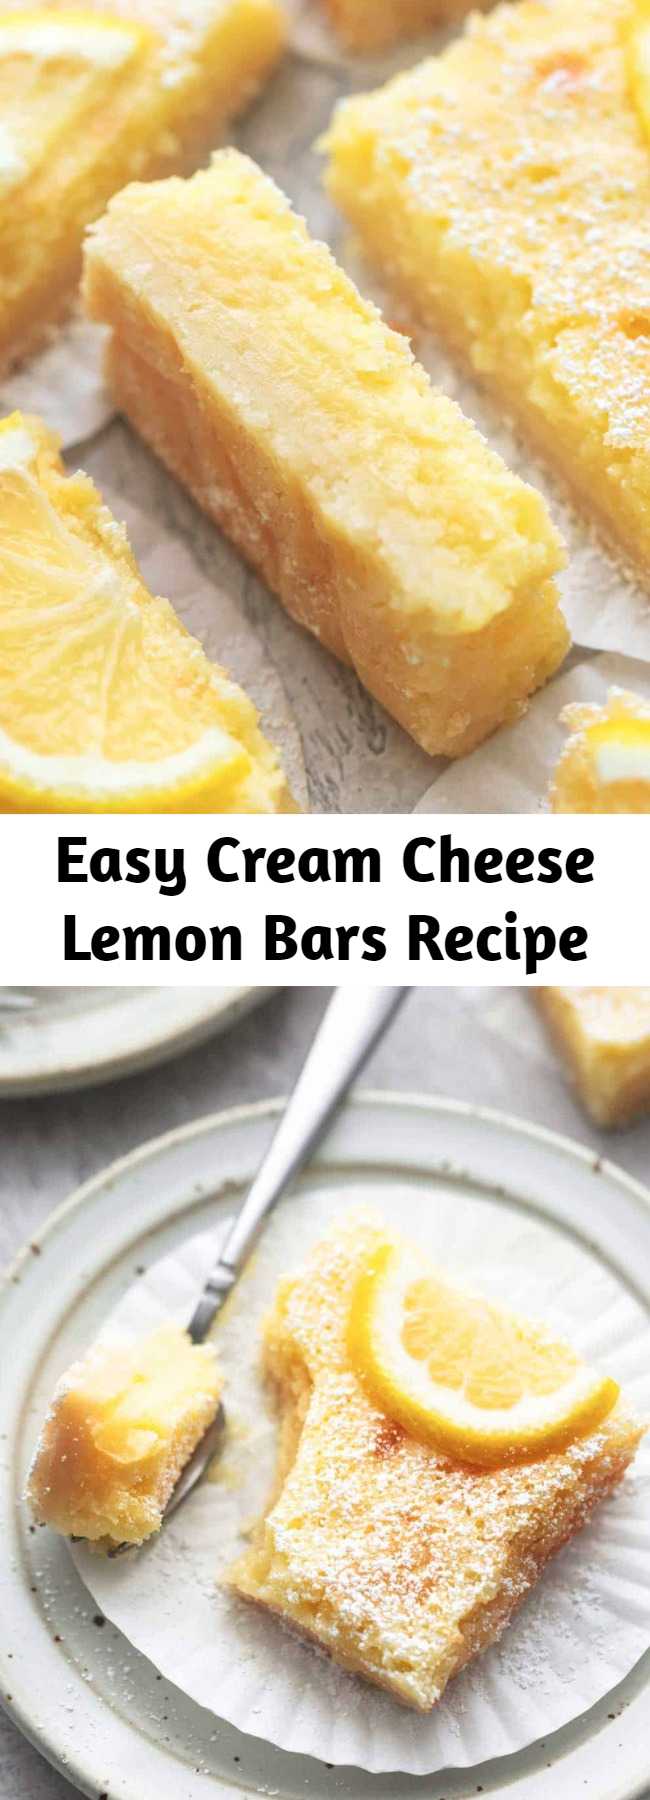 Easy Cream Cheese Lemon Bars Recipe - Cream Cheese Lemon Bars are the dessert you never knew you needed, but bake them once, and you'll never go without them again. Sweet, cream cheesy, lemony, buttery, and so easy!